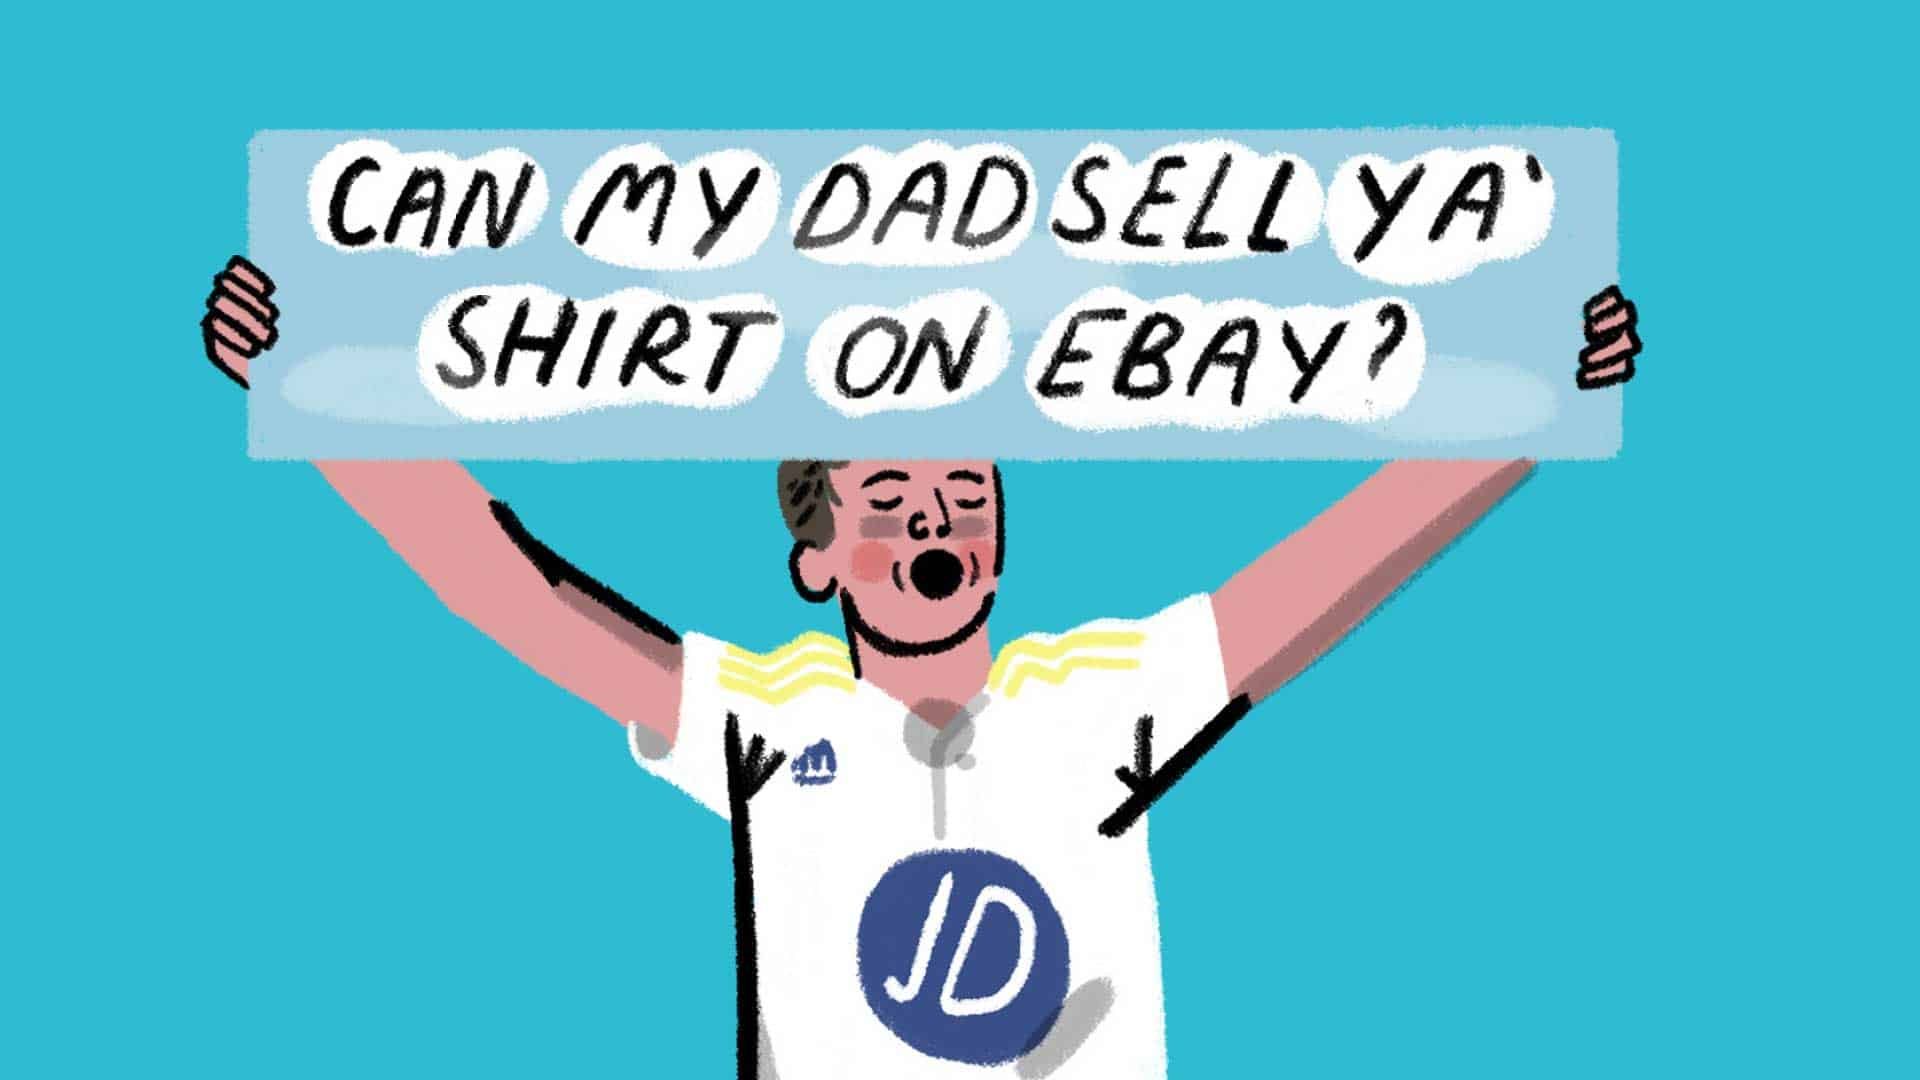 An illustration of a Leeds fan holding a banner reading 'Can my dad sell ya shirt on ebay?'